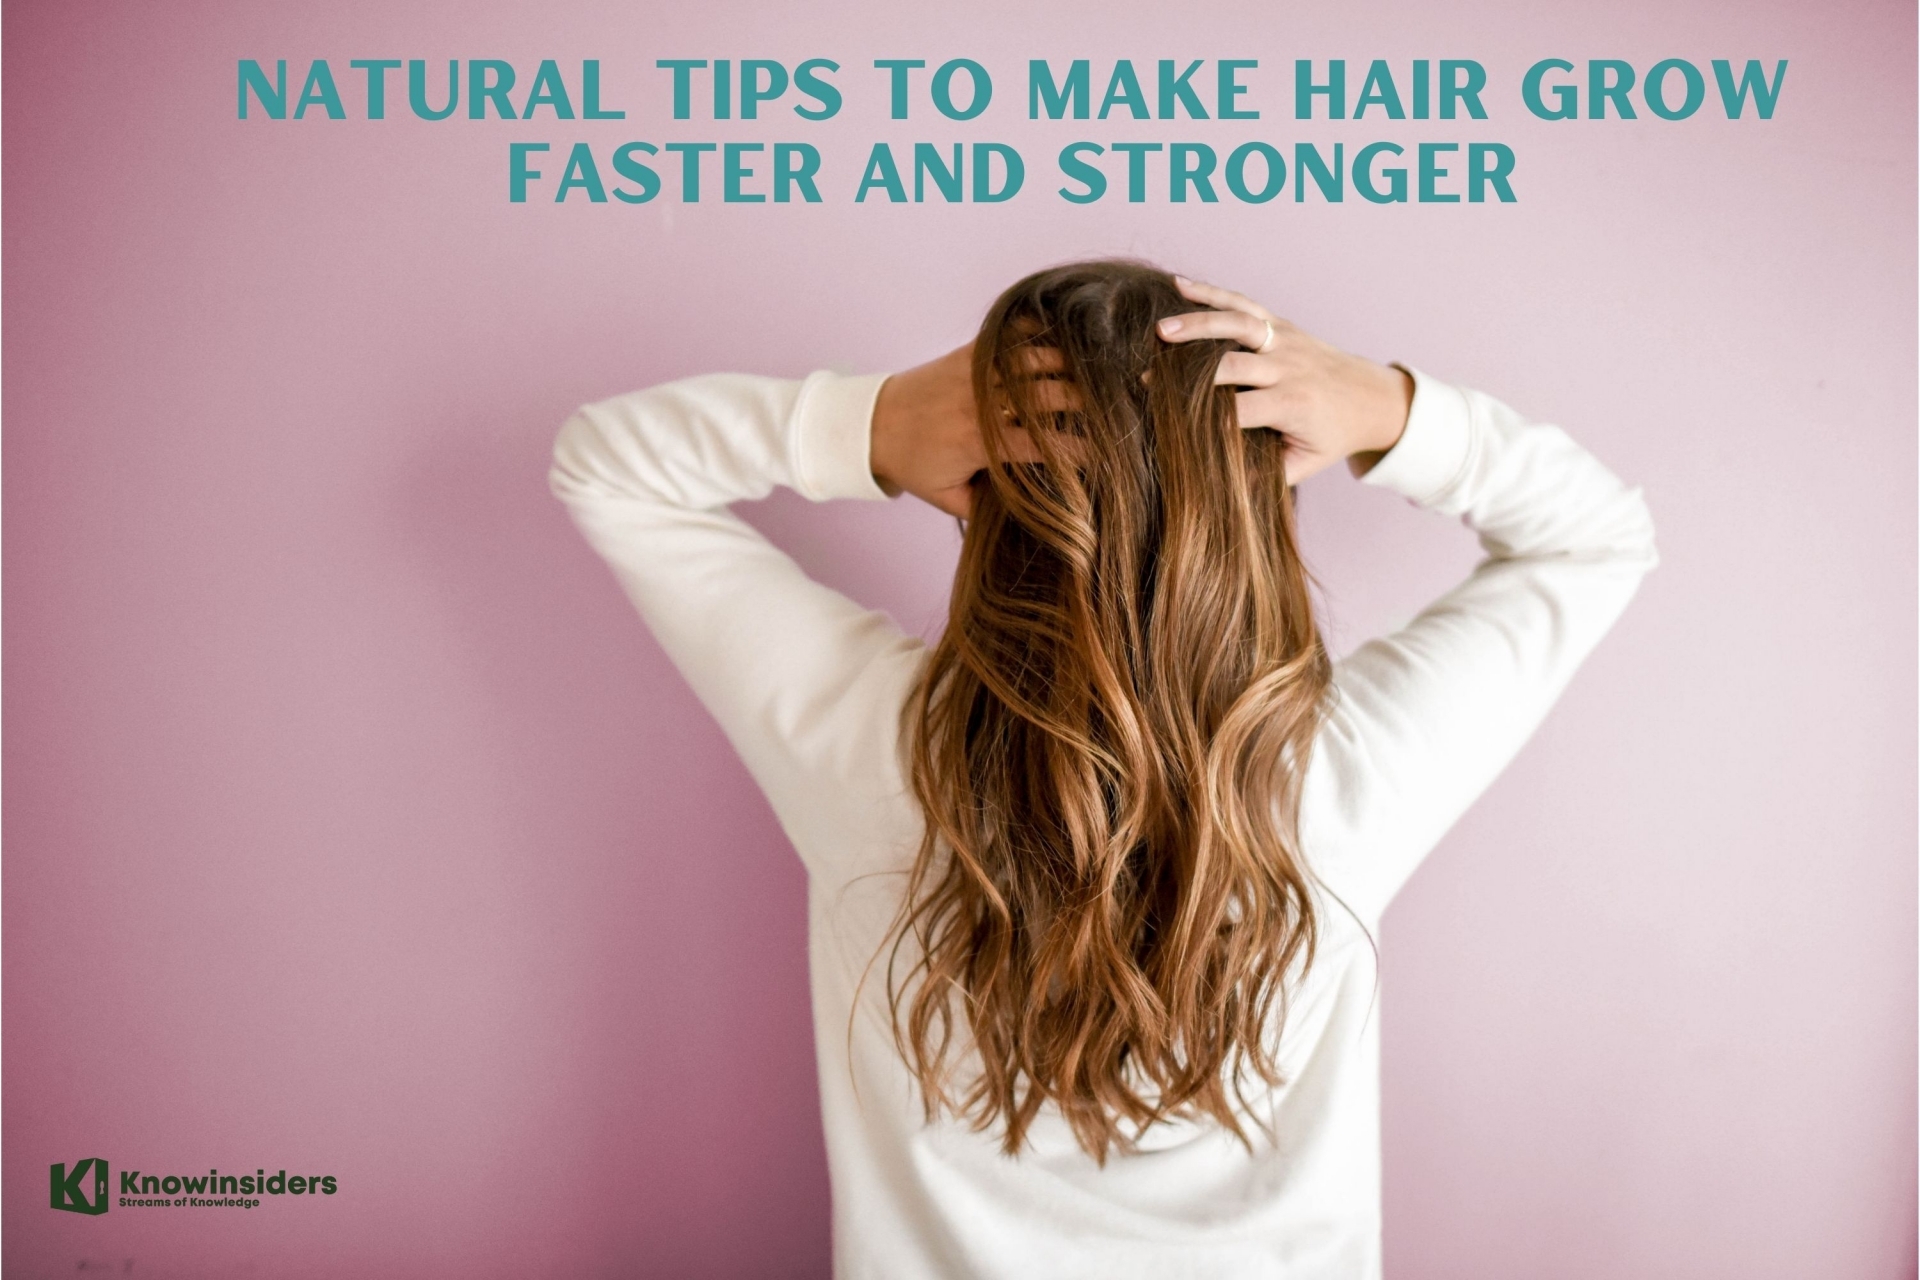 Natural Tips To Make Your Hair Grow Faster - Ridiculous but Useful